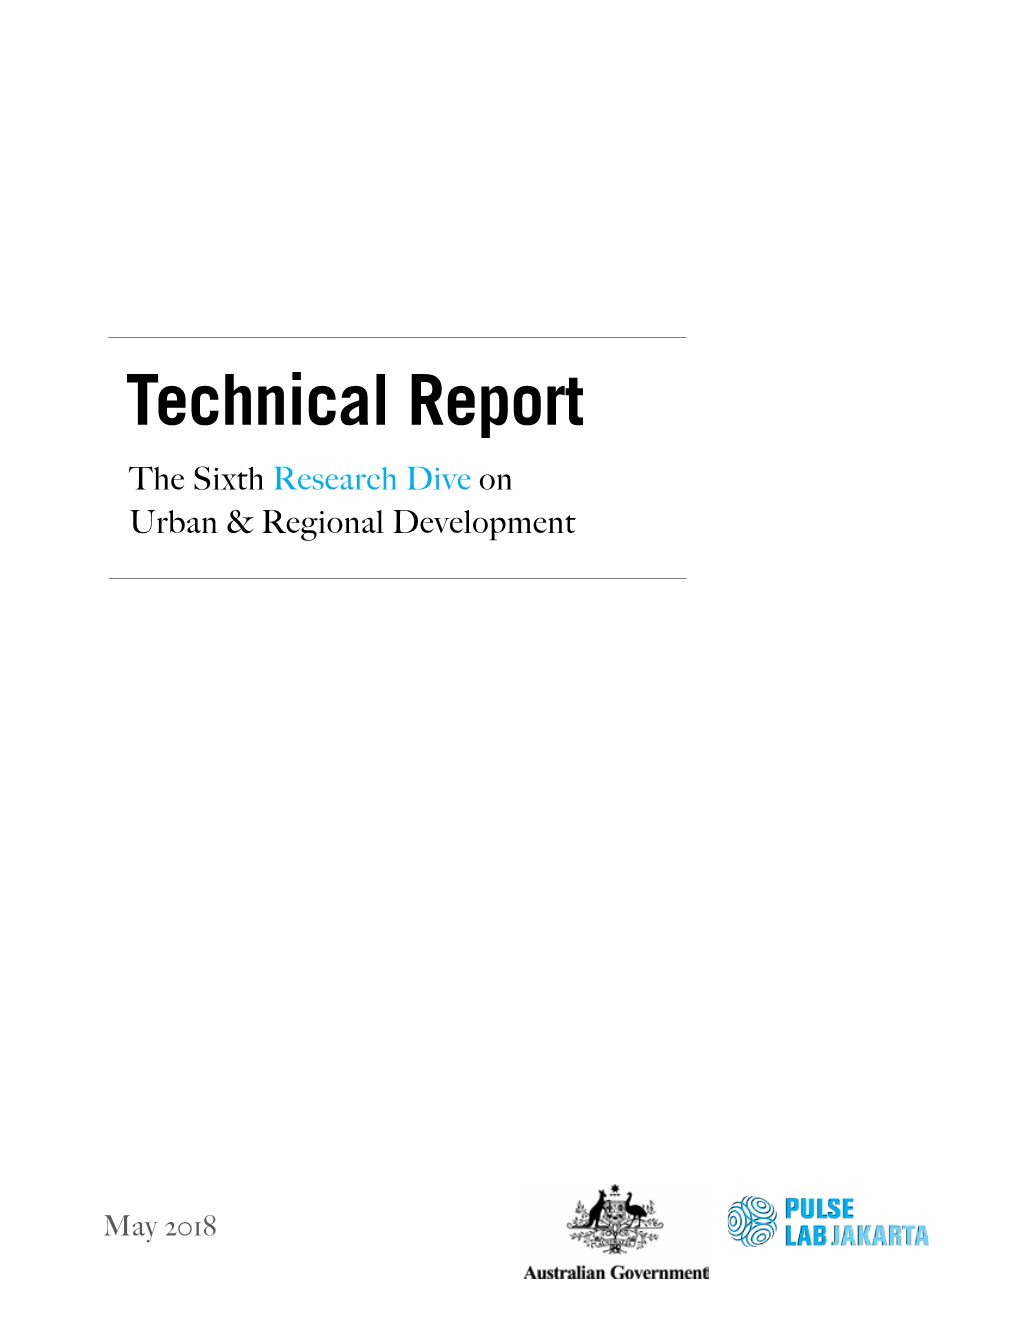 Technical Report the Sixth Research Dive on Urban & Regional Development